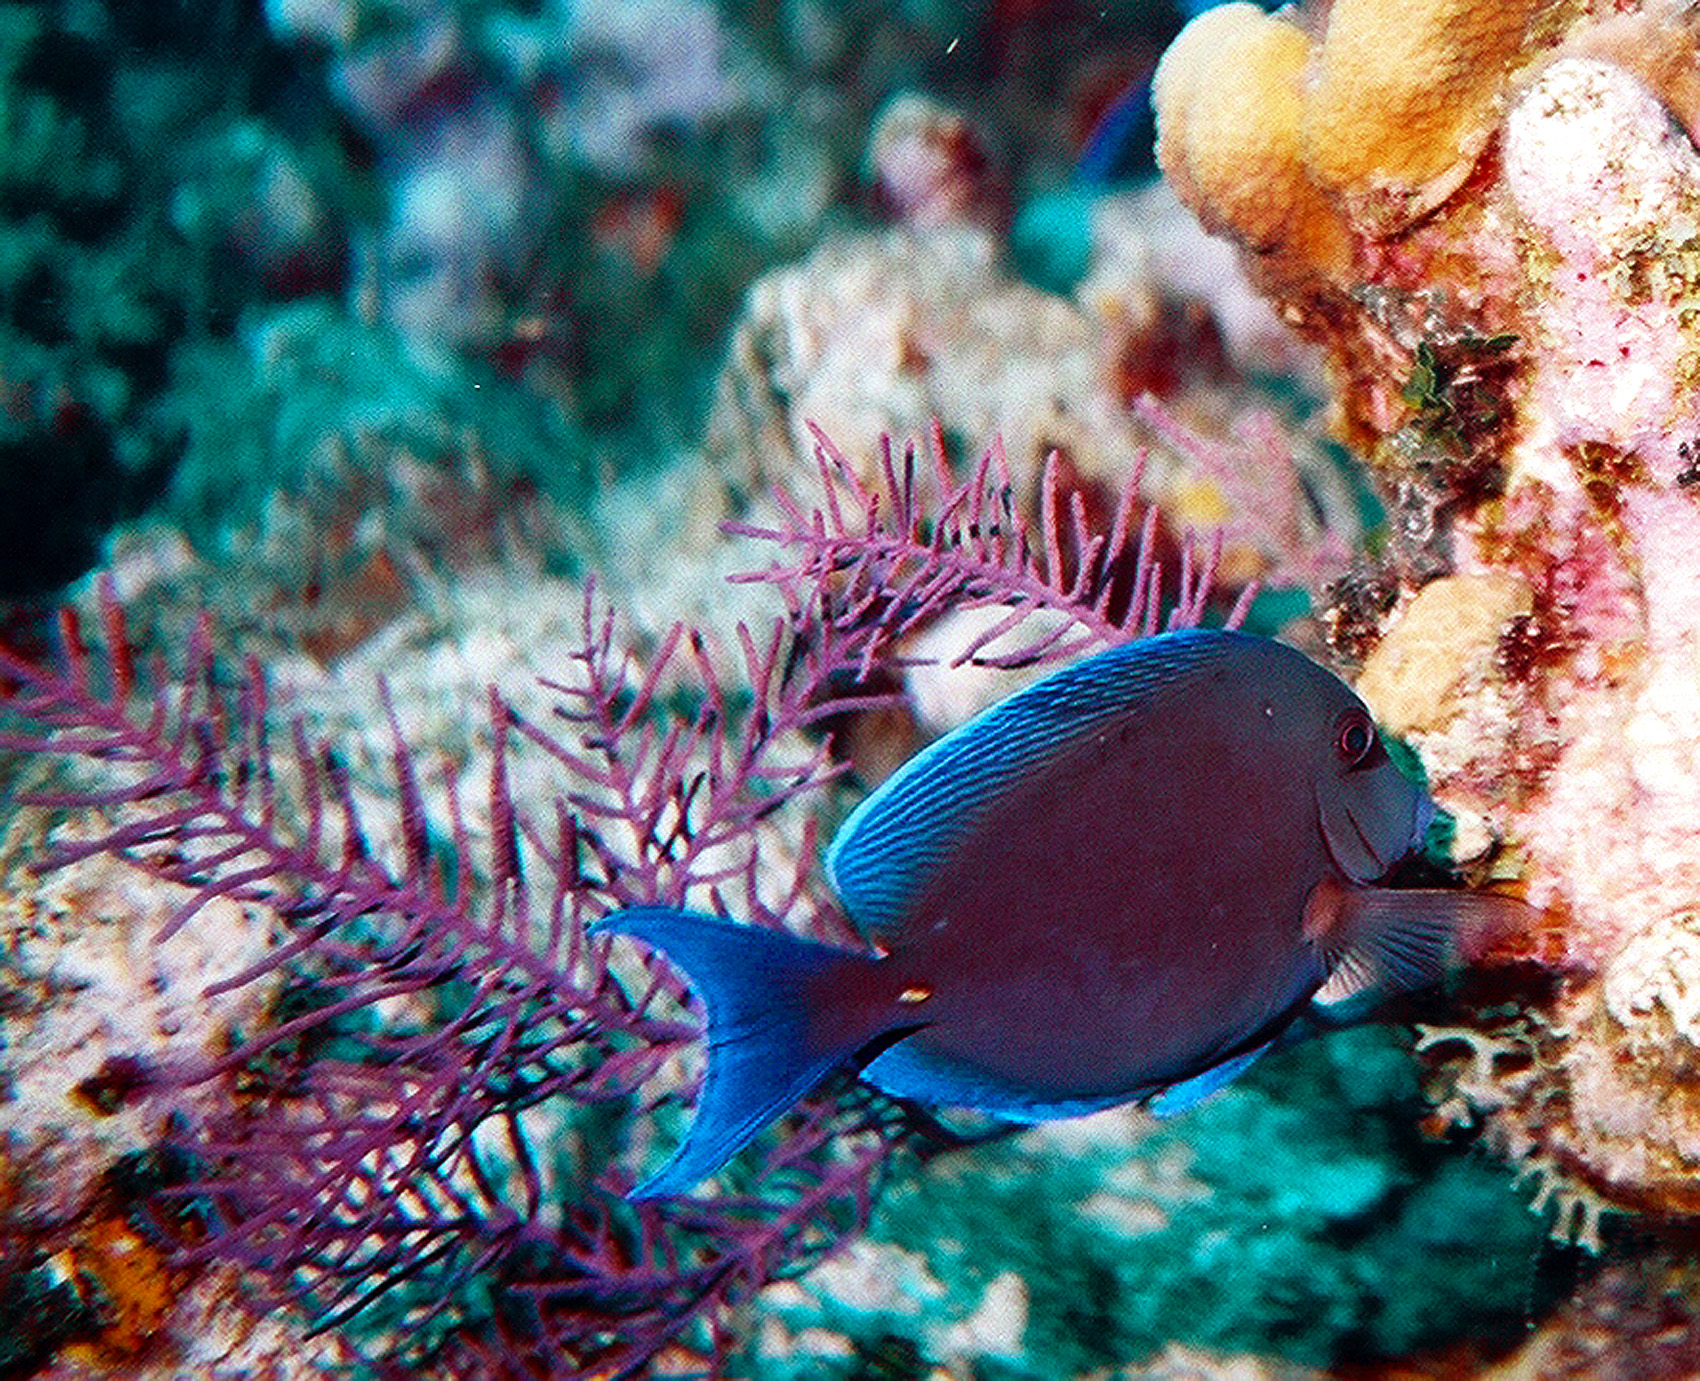 A second shot from Grand Turk of a Blue Tang